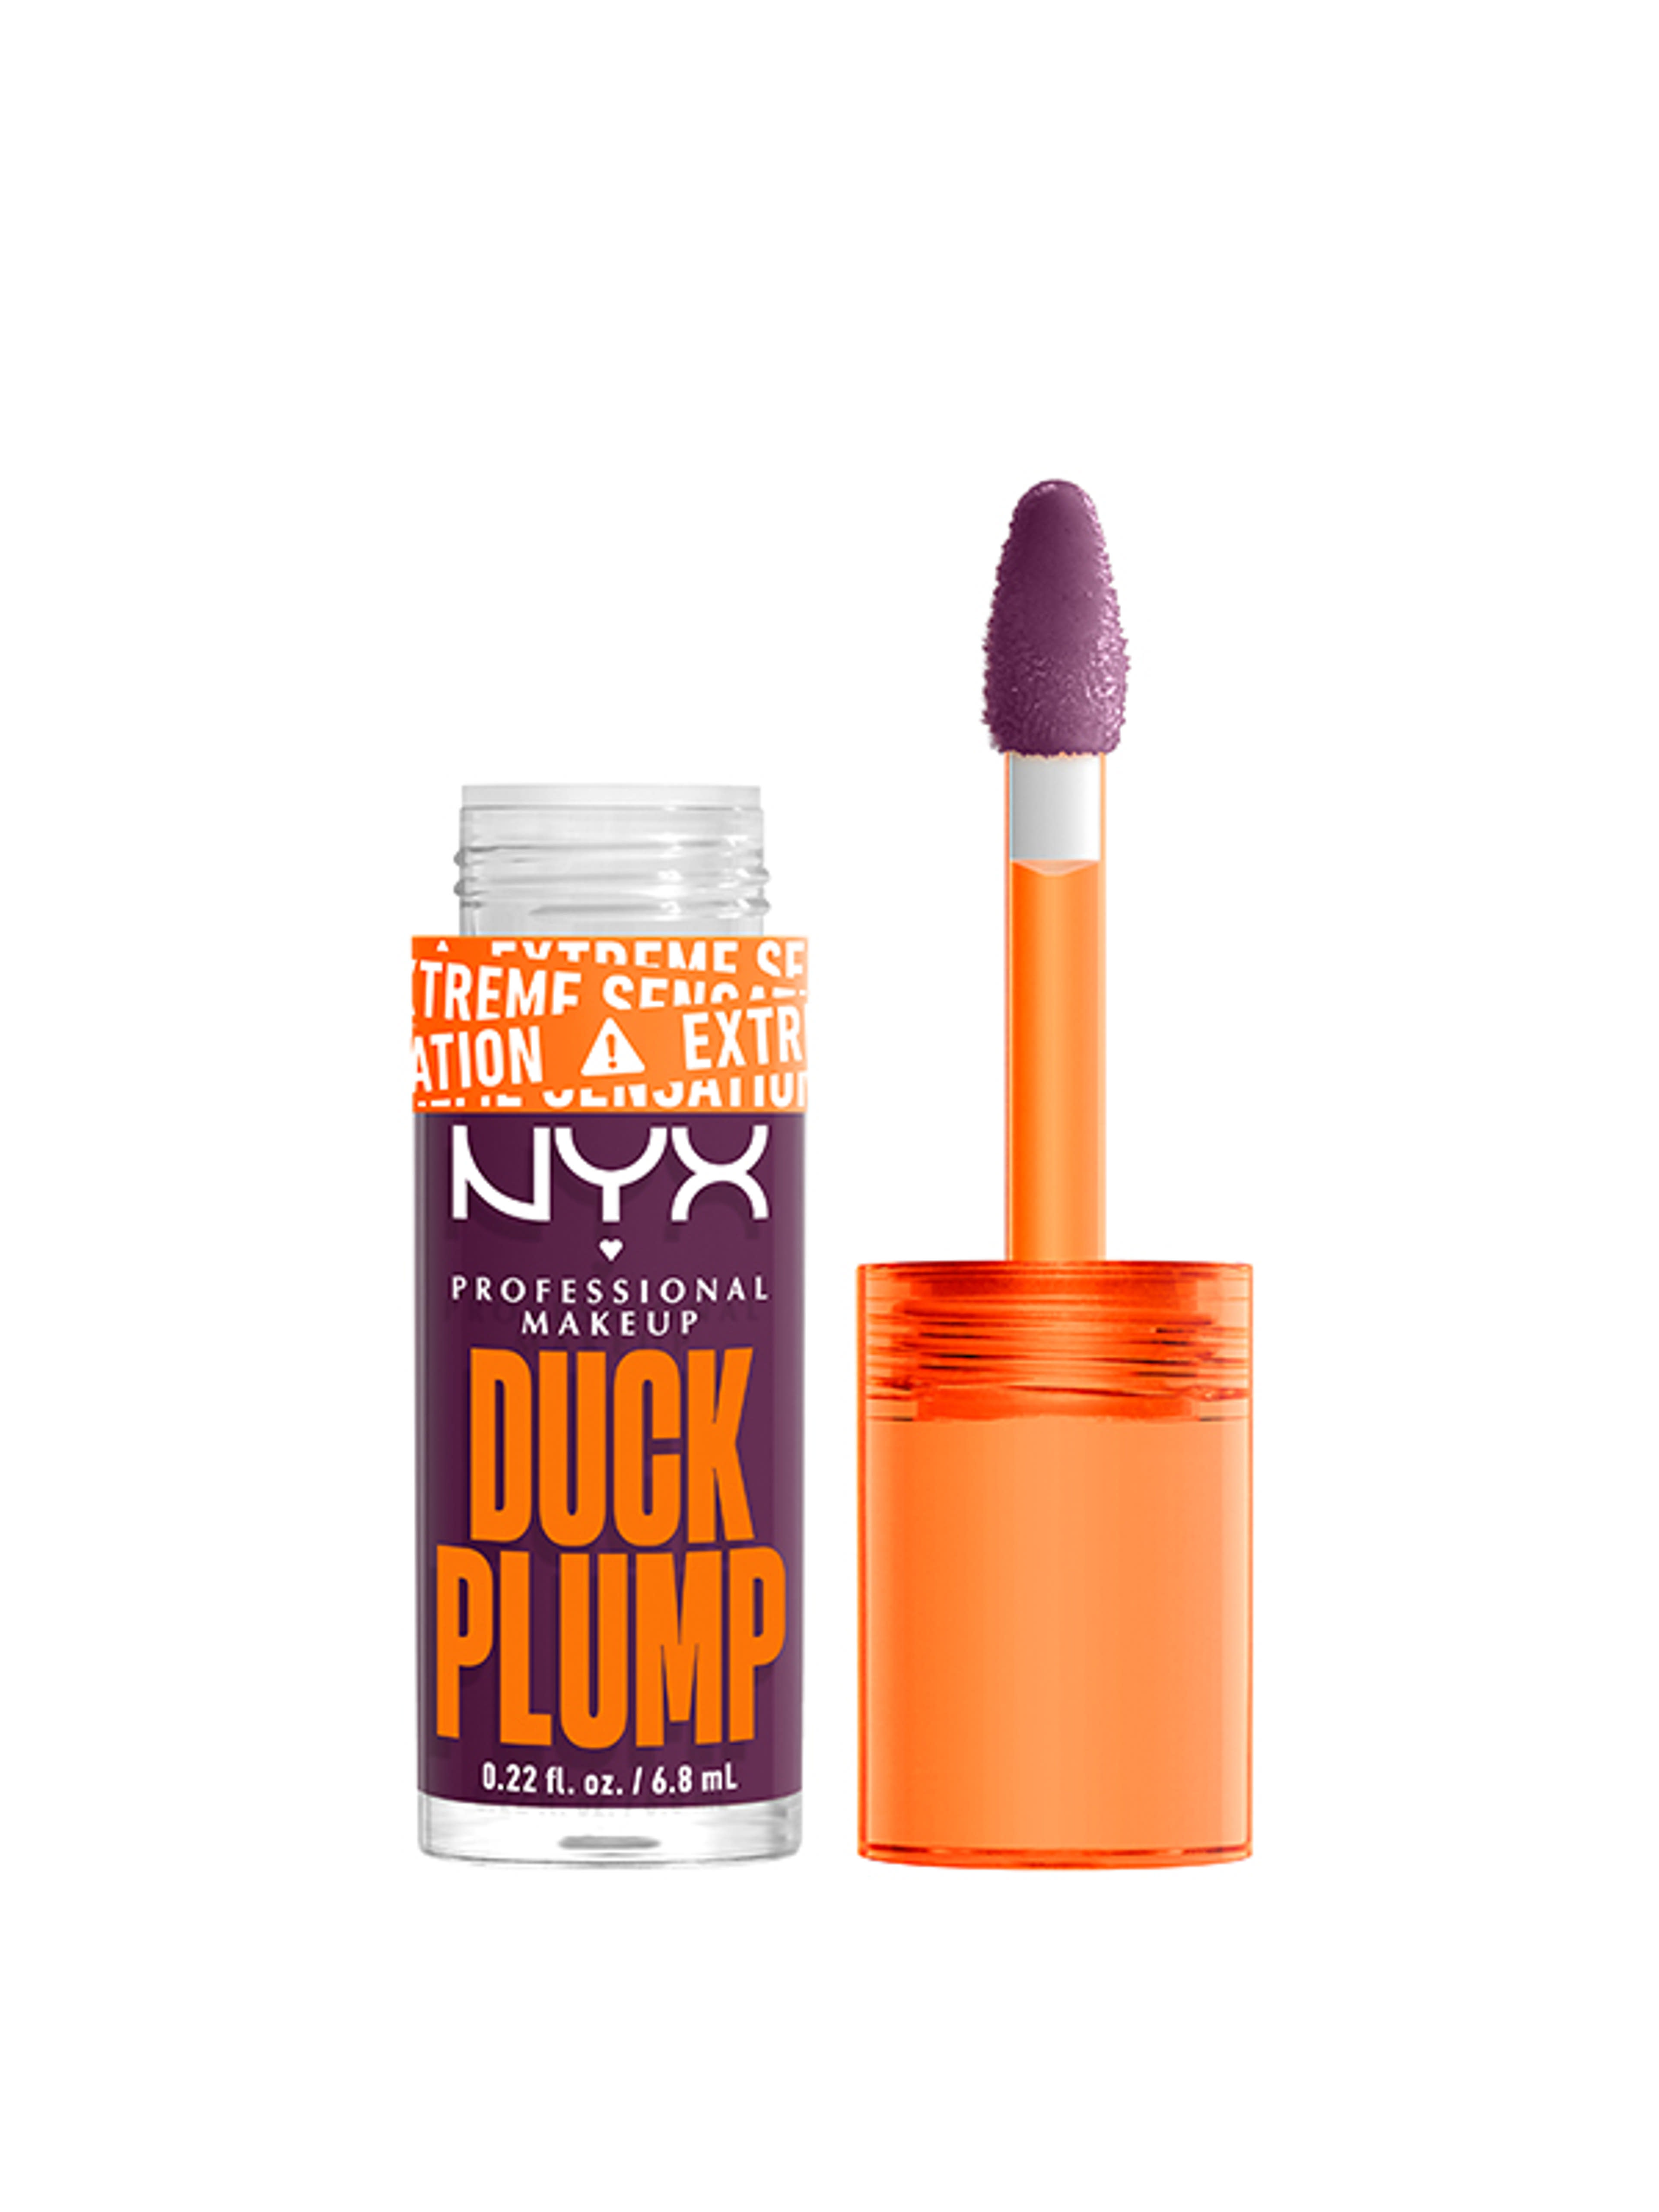 NYX Professional Makeup Duck Plump ajakfény /pure plump - 1 db-2